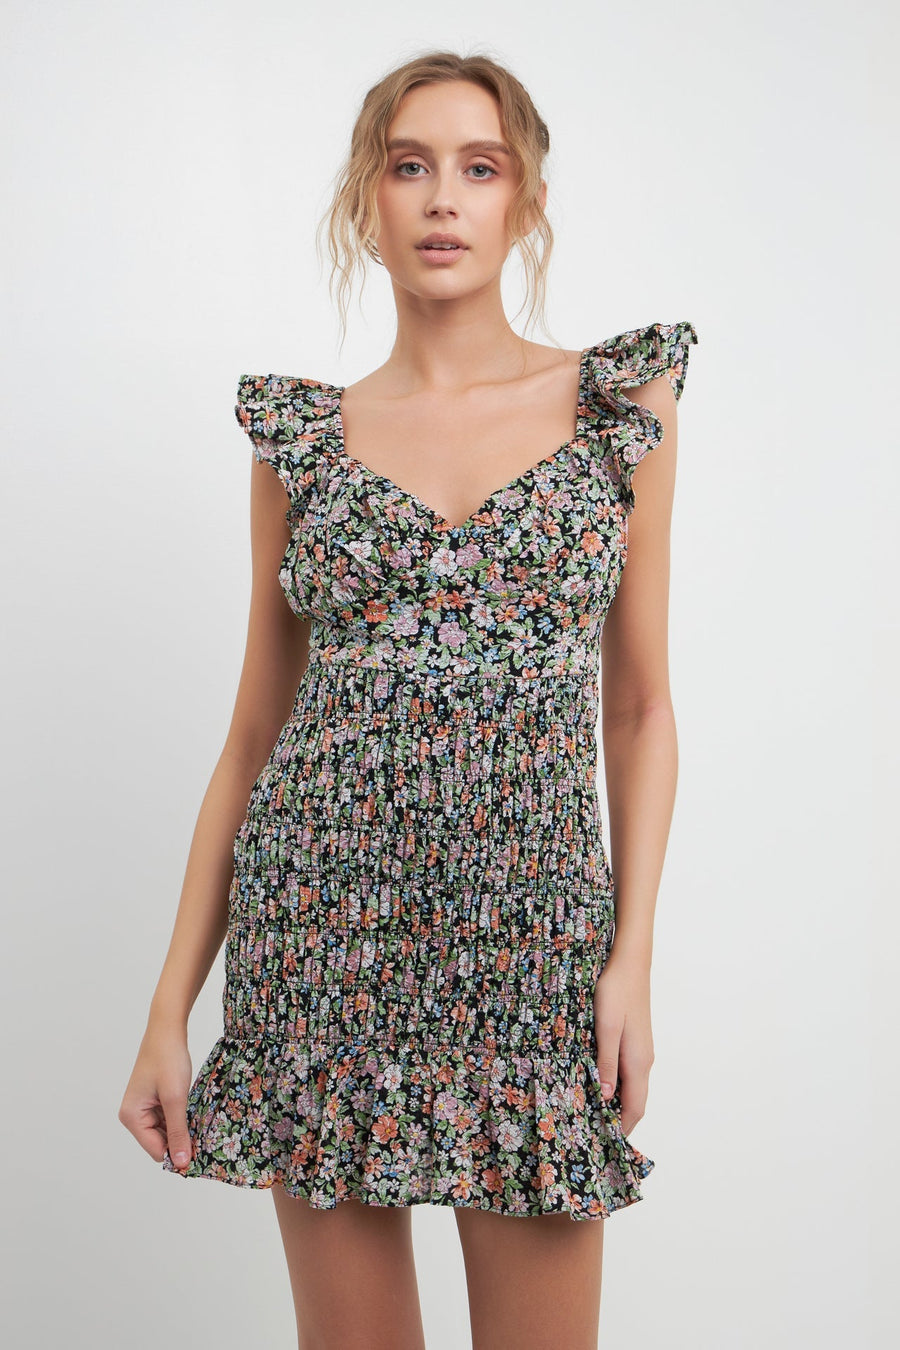 FREE THE ROSES-Floral Smocked Mini Dress-DRESSES available at Objectrare